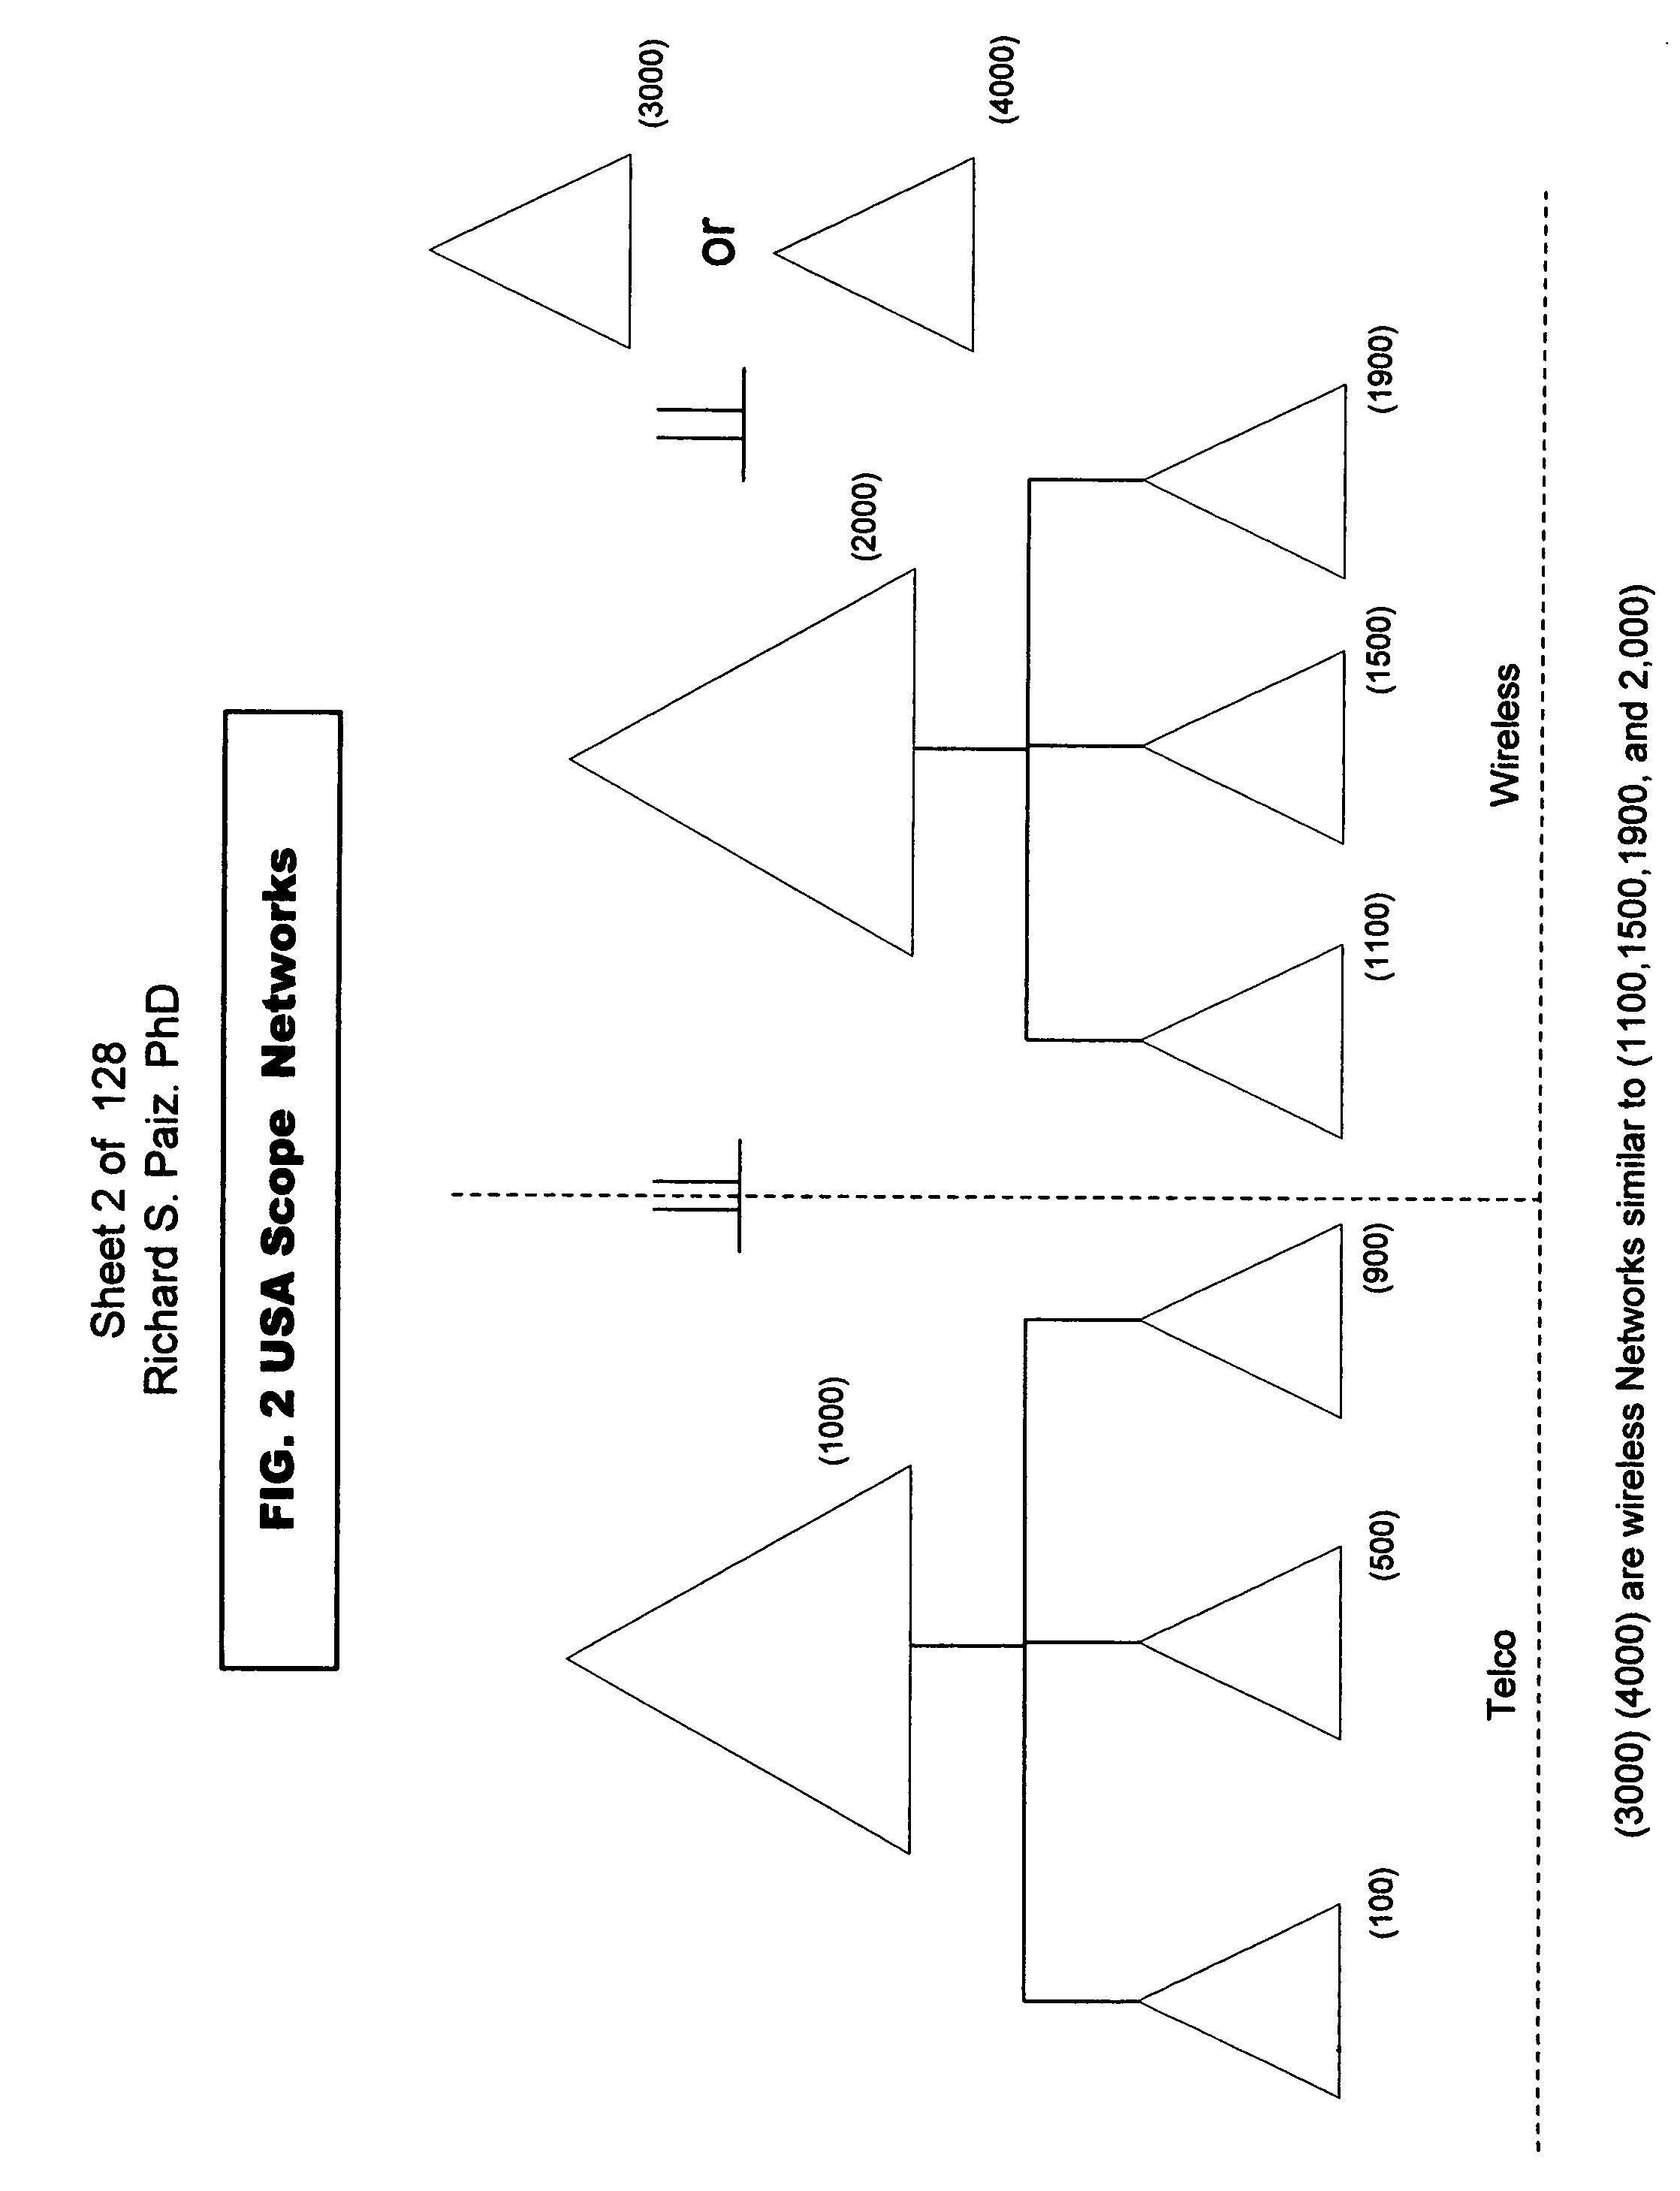 Parallel computer network and method for telecommunications network simulation to route calls and continuously estimate call billing in real time